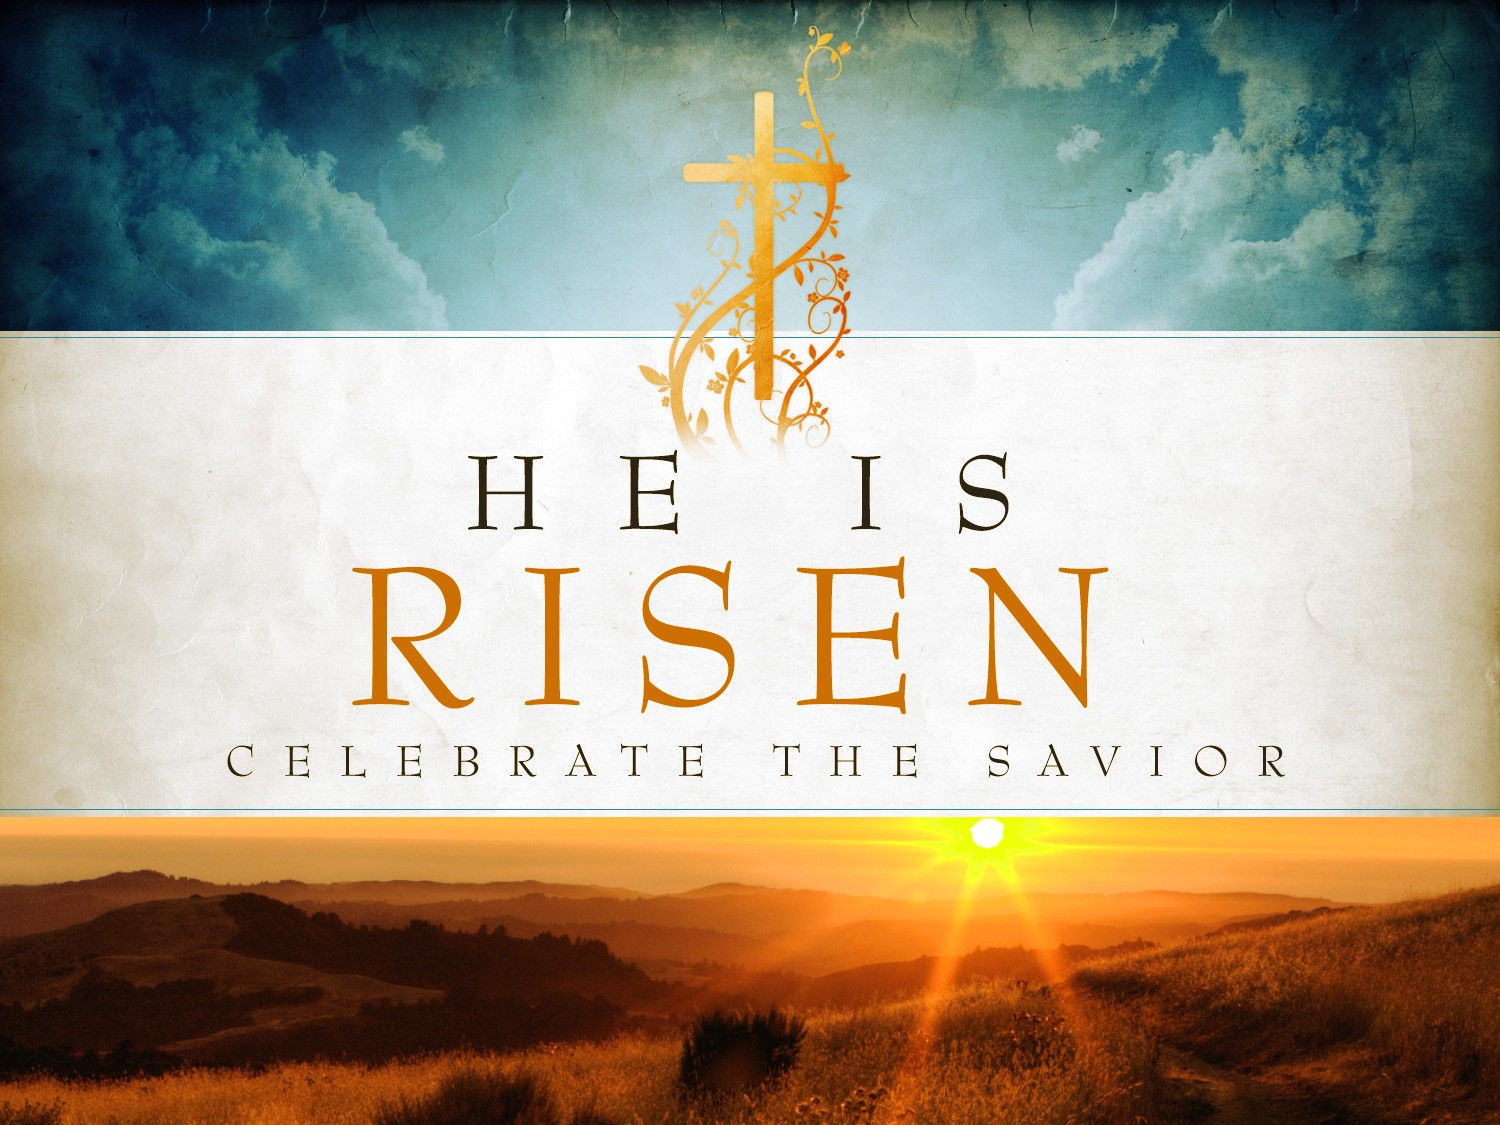 Bible Quotes for Easter Best Of 25 Inspiring Happy Easter Quotes From the Bible